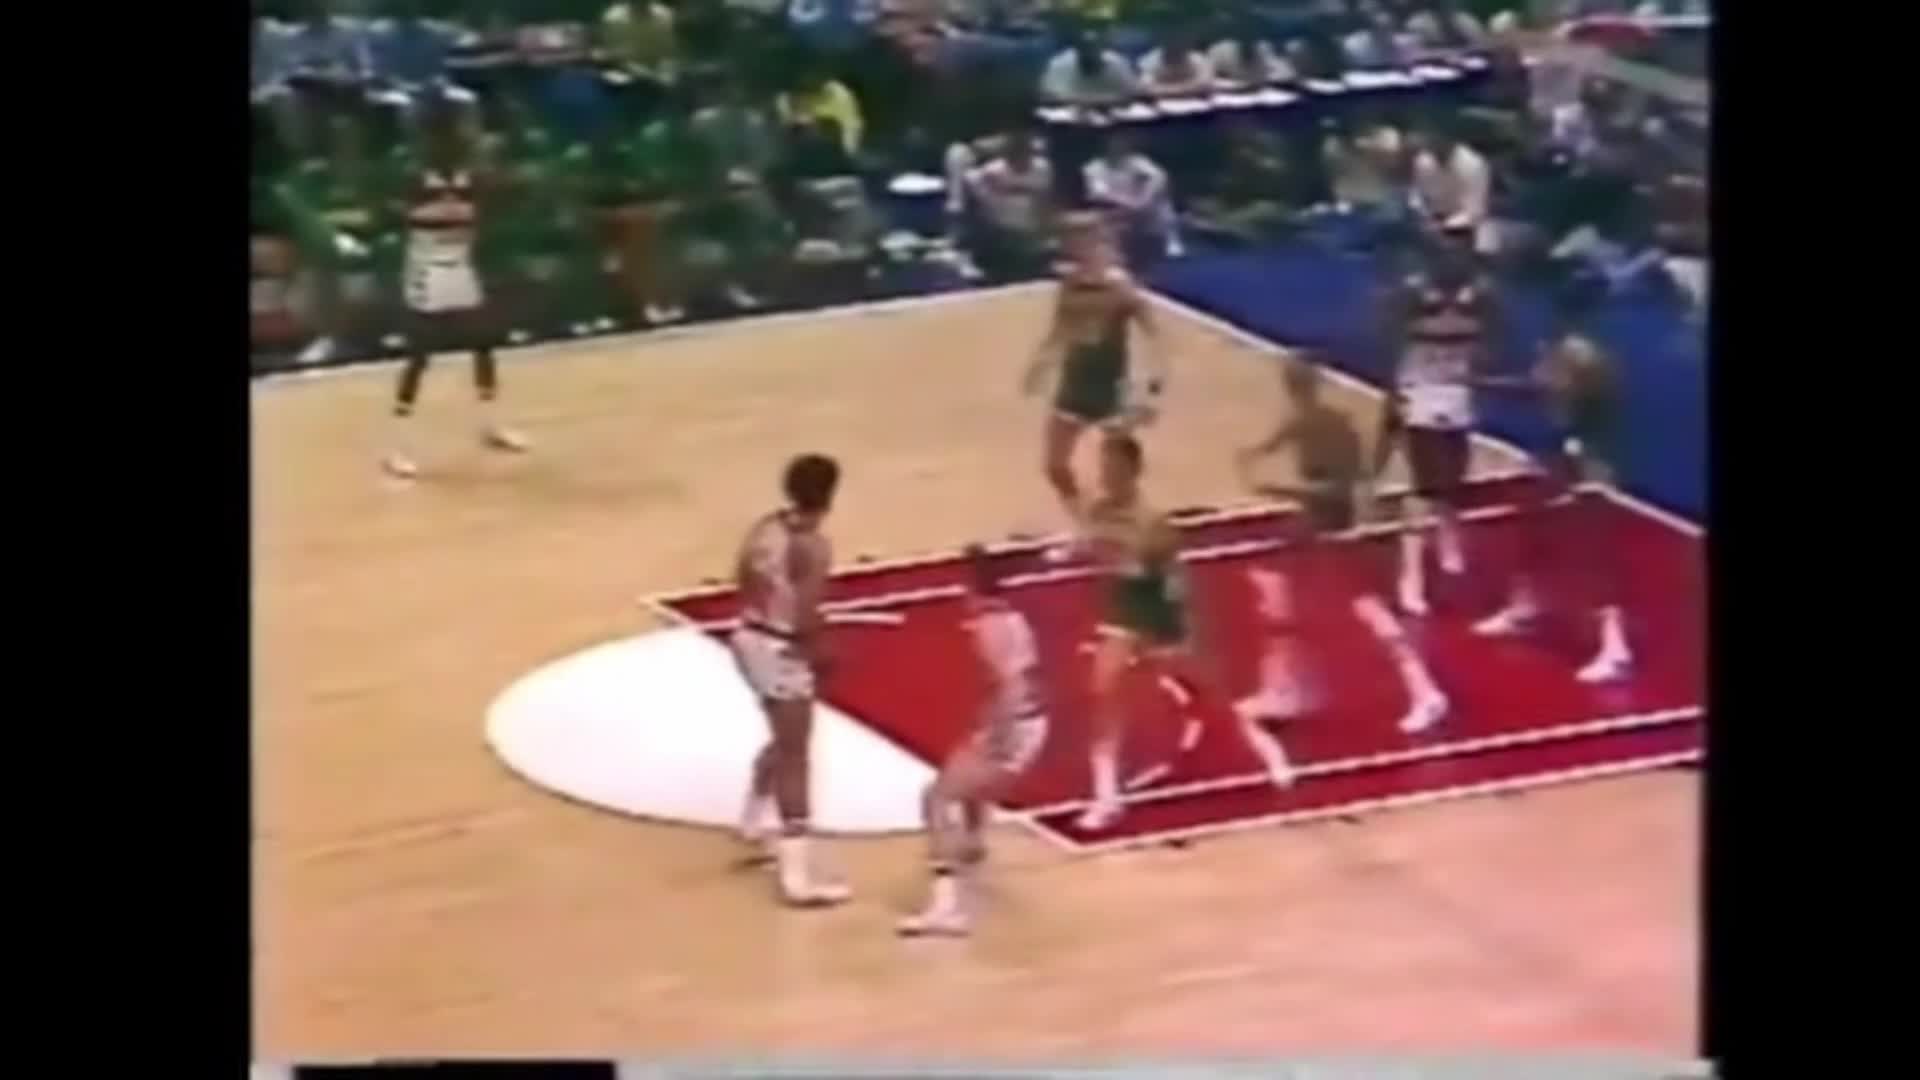 Highlight] Ray Allen splashes 4 straight 3s during Game 6 of the 2001 ECF.  He scored 19 straight points for the Bucks and 41 total to push the series  to Game 7 : r/nba